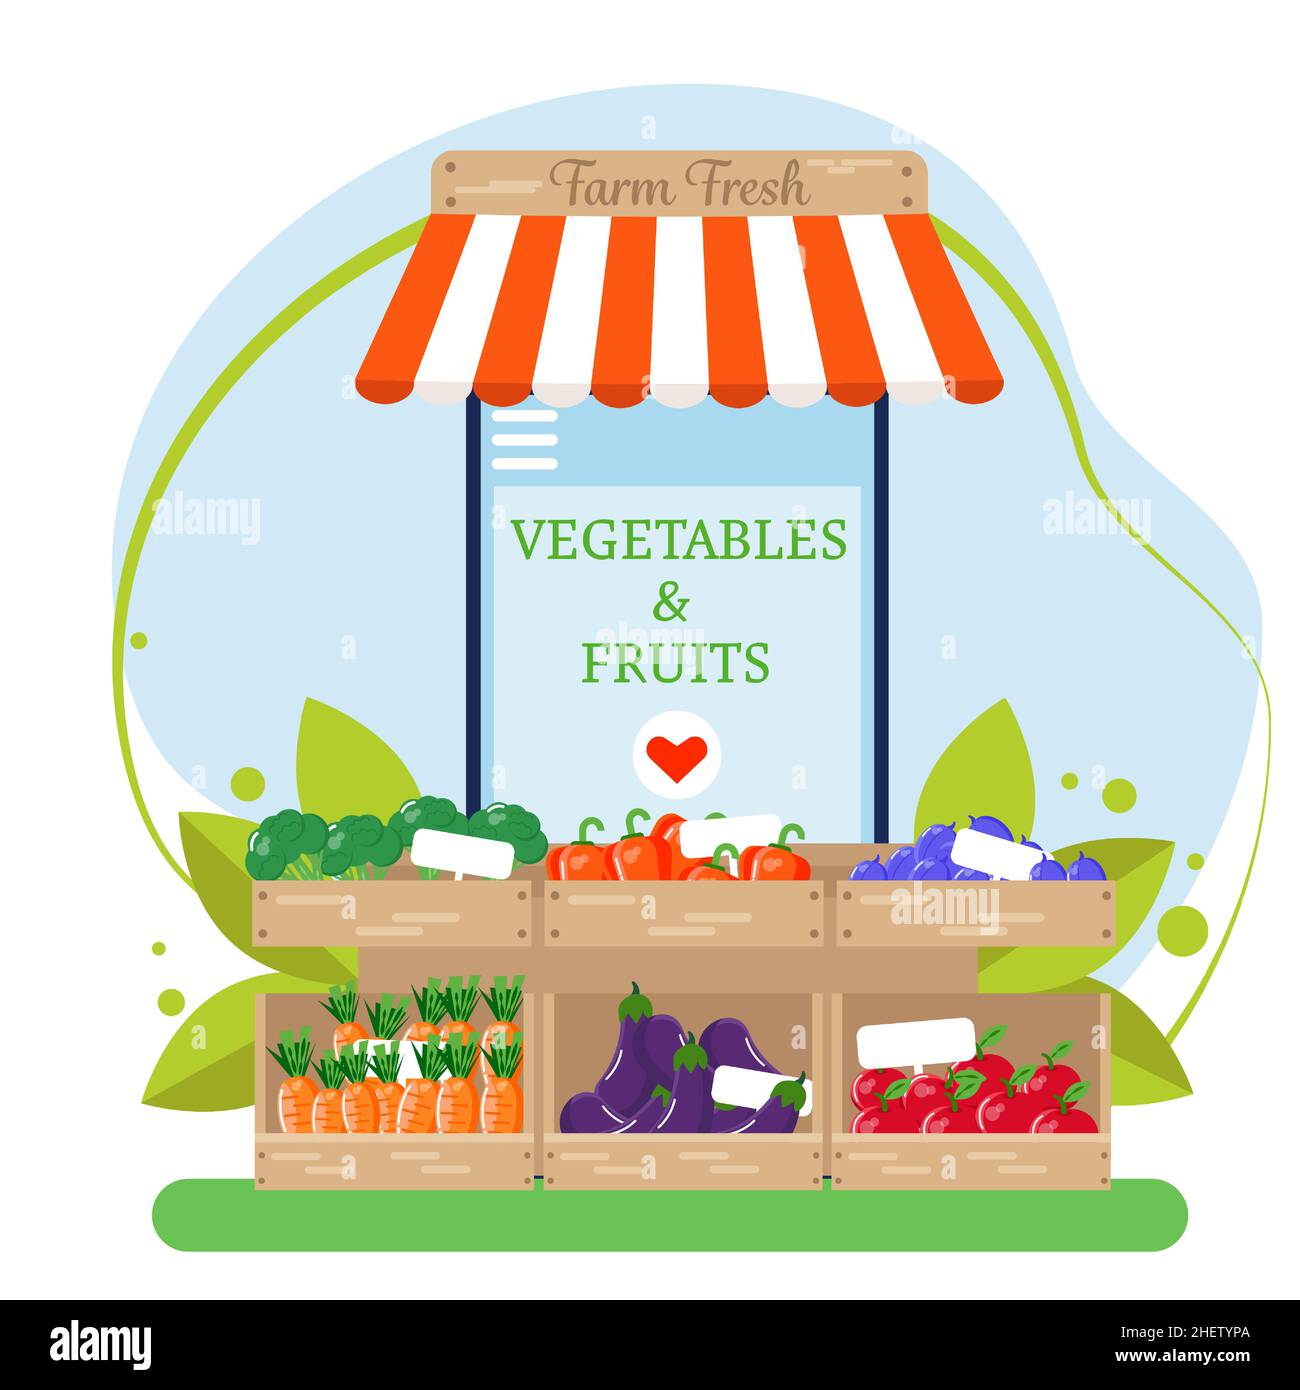 Mobile phone with awning and kiosk with fresh farm products. Eco-friendly vegetables and fruits. Vector illustration in flat style. Stock Vector